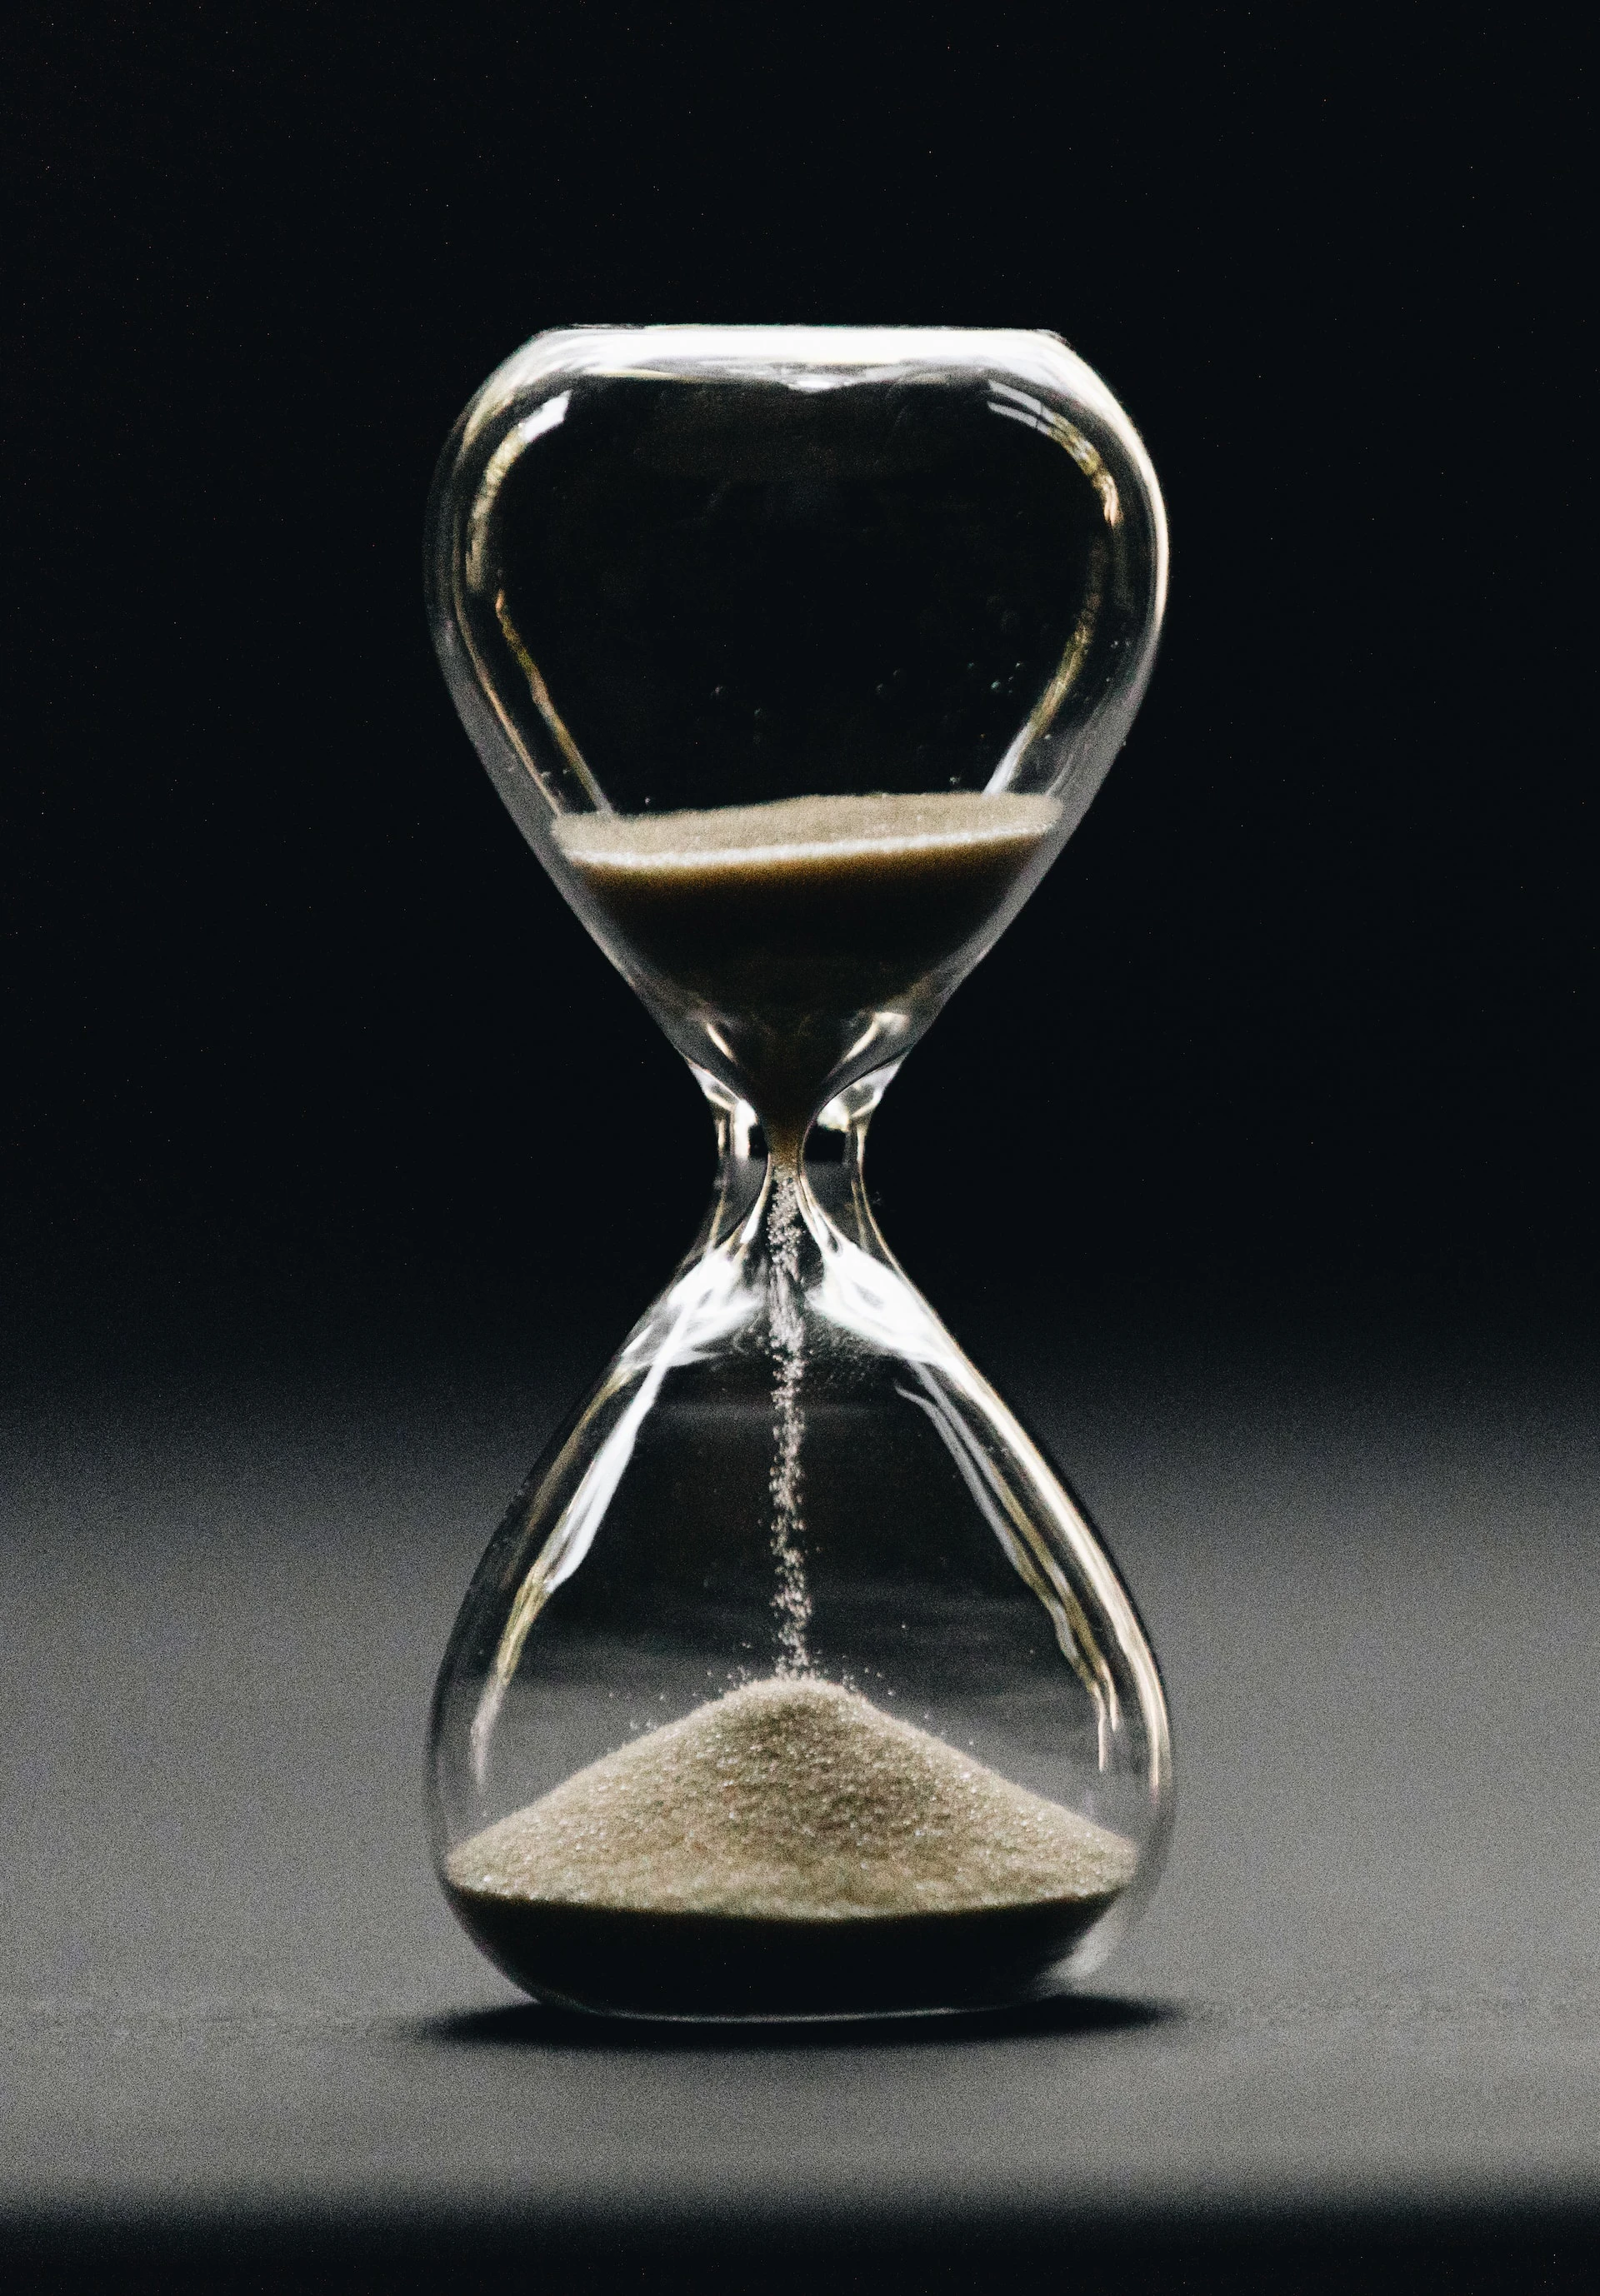 An hourglass in action